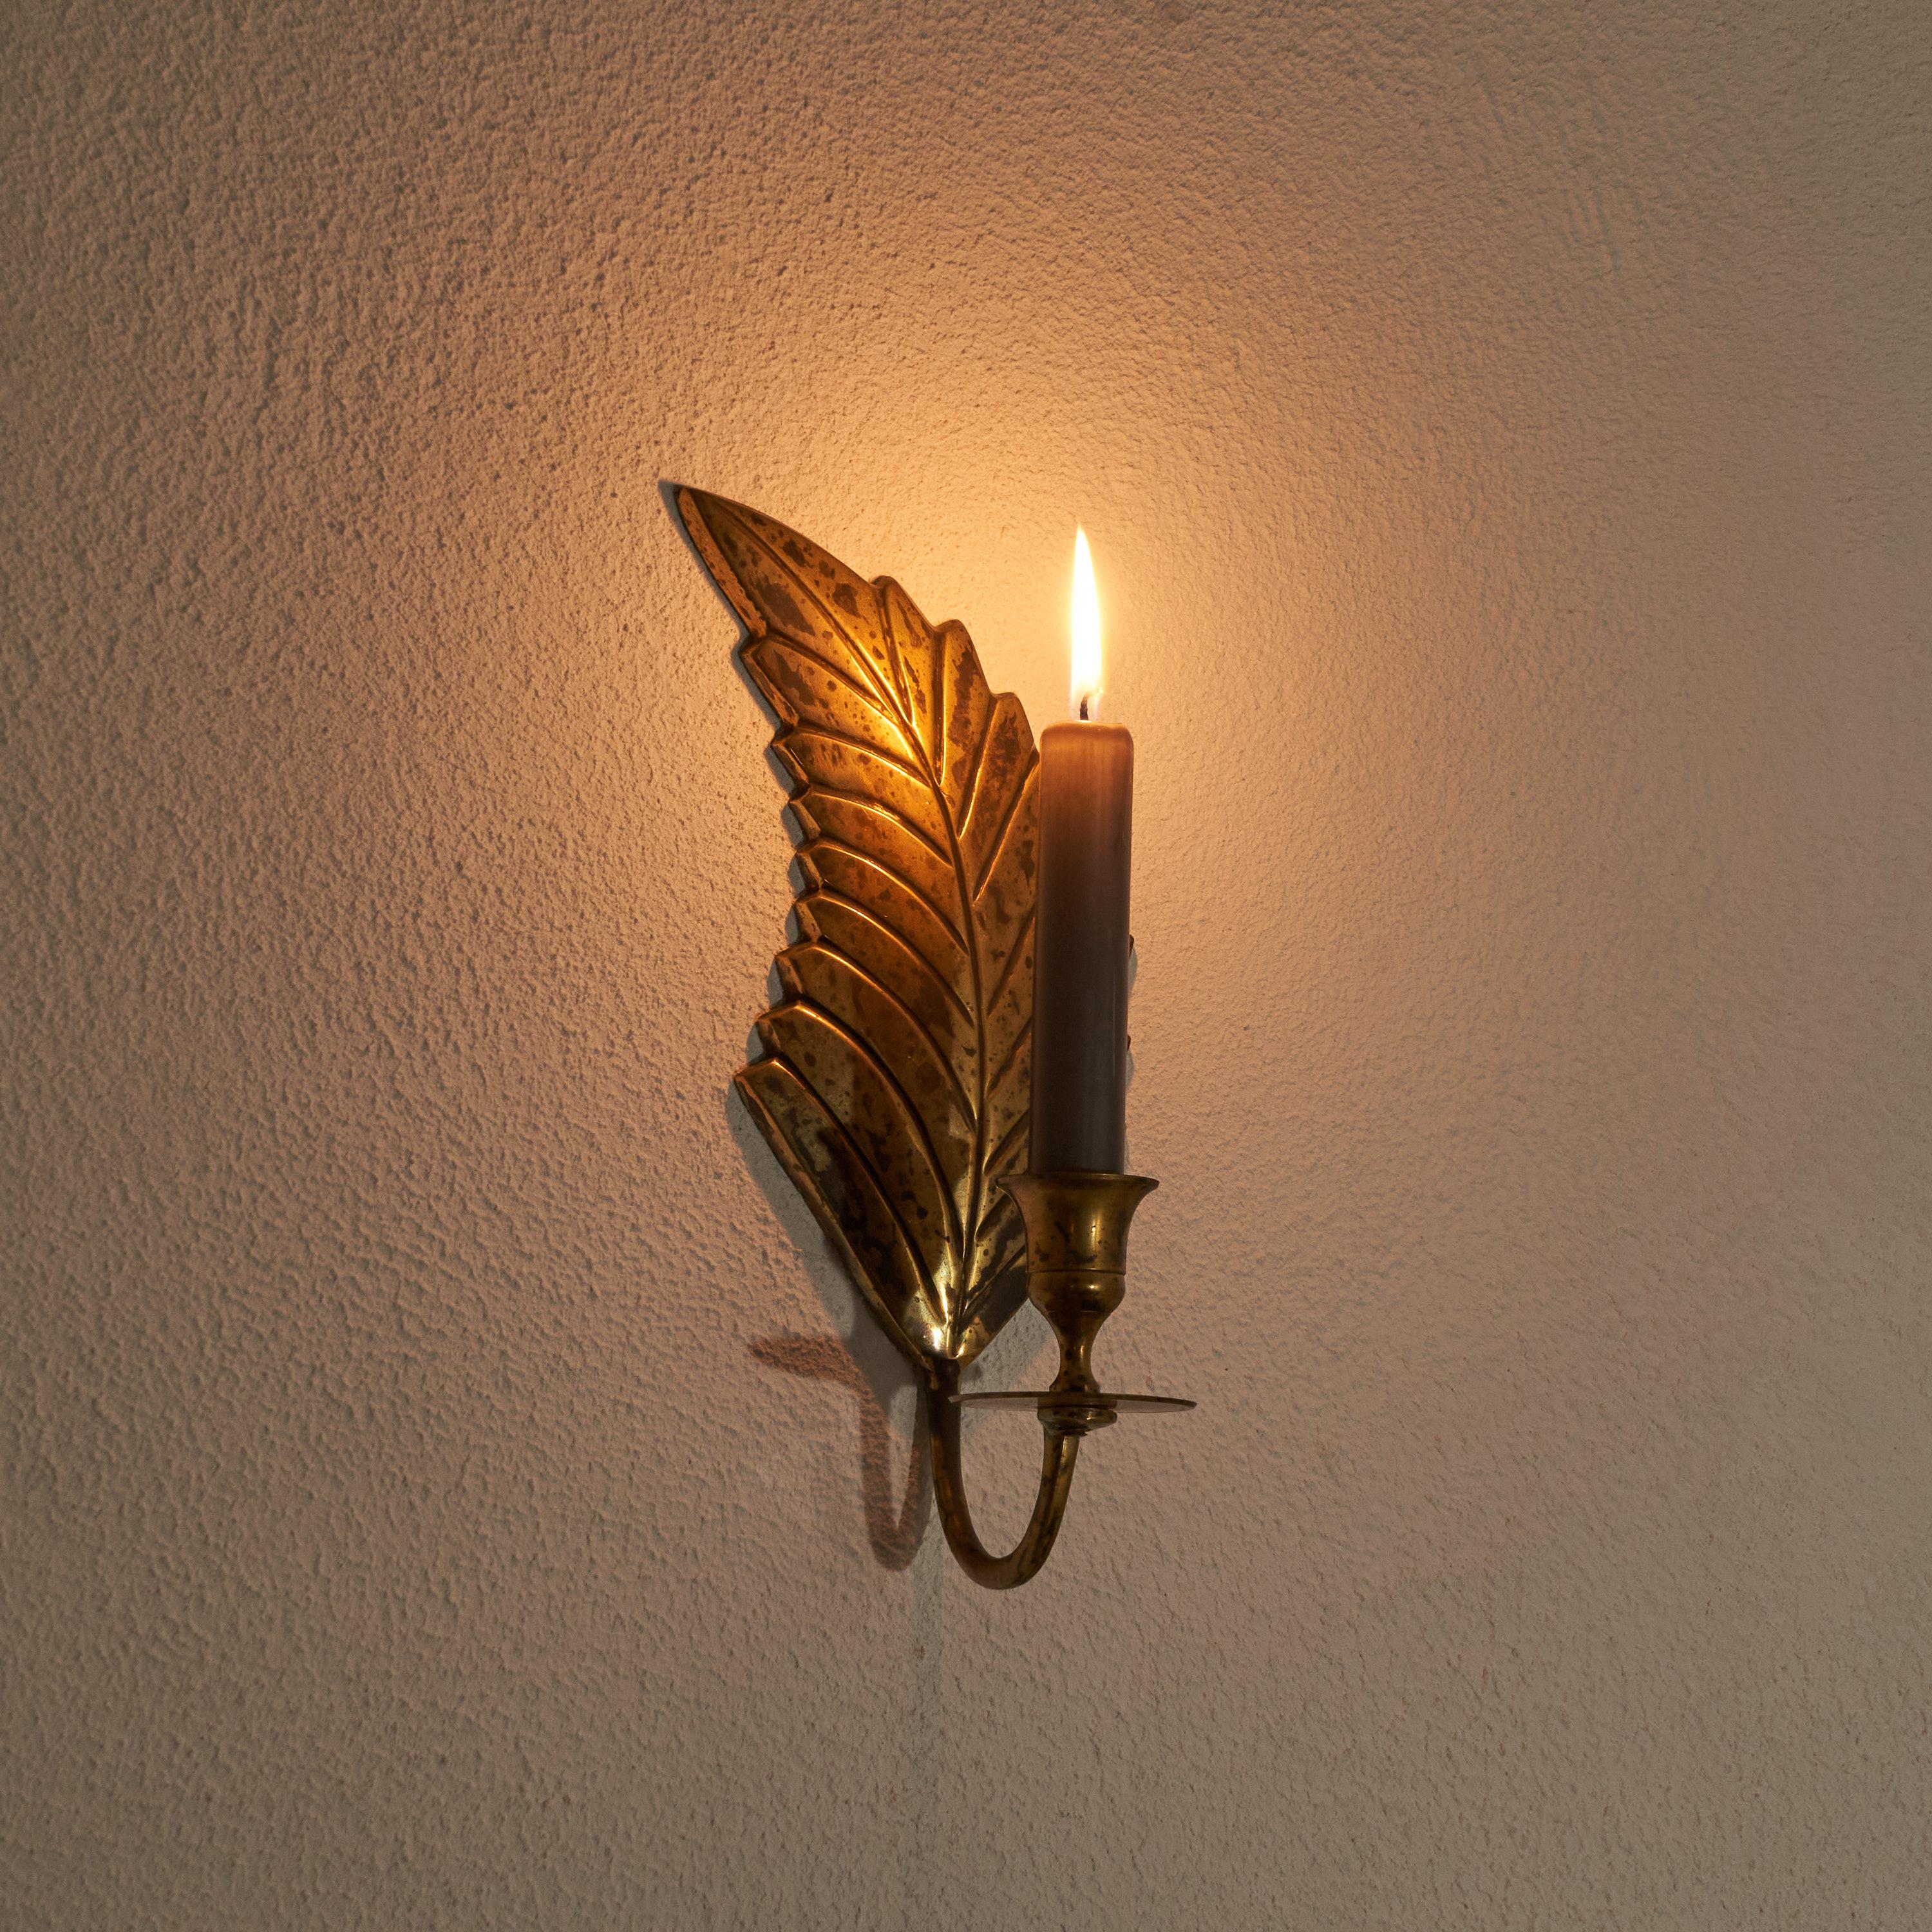 Leaf Shaped candle sconce in Patinated Brass 1970s.

Wonderful and elegant candle sconce in the shape of a leaf. Made in brass, this candle sconce makes sure the light is reflected in a warm and cozy way. The brass surface is patinated, which only